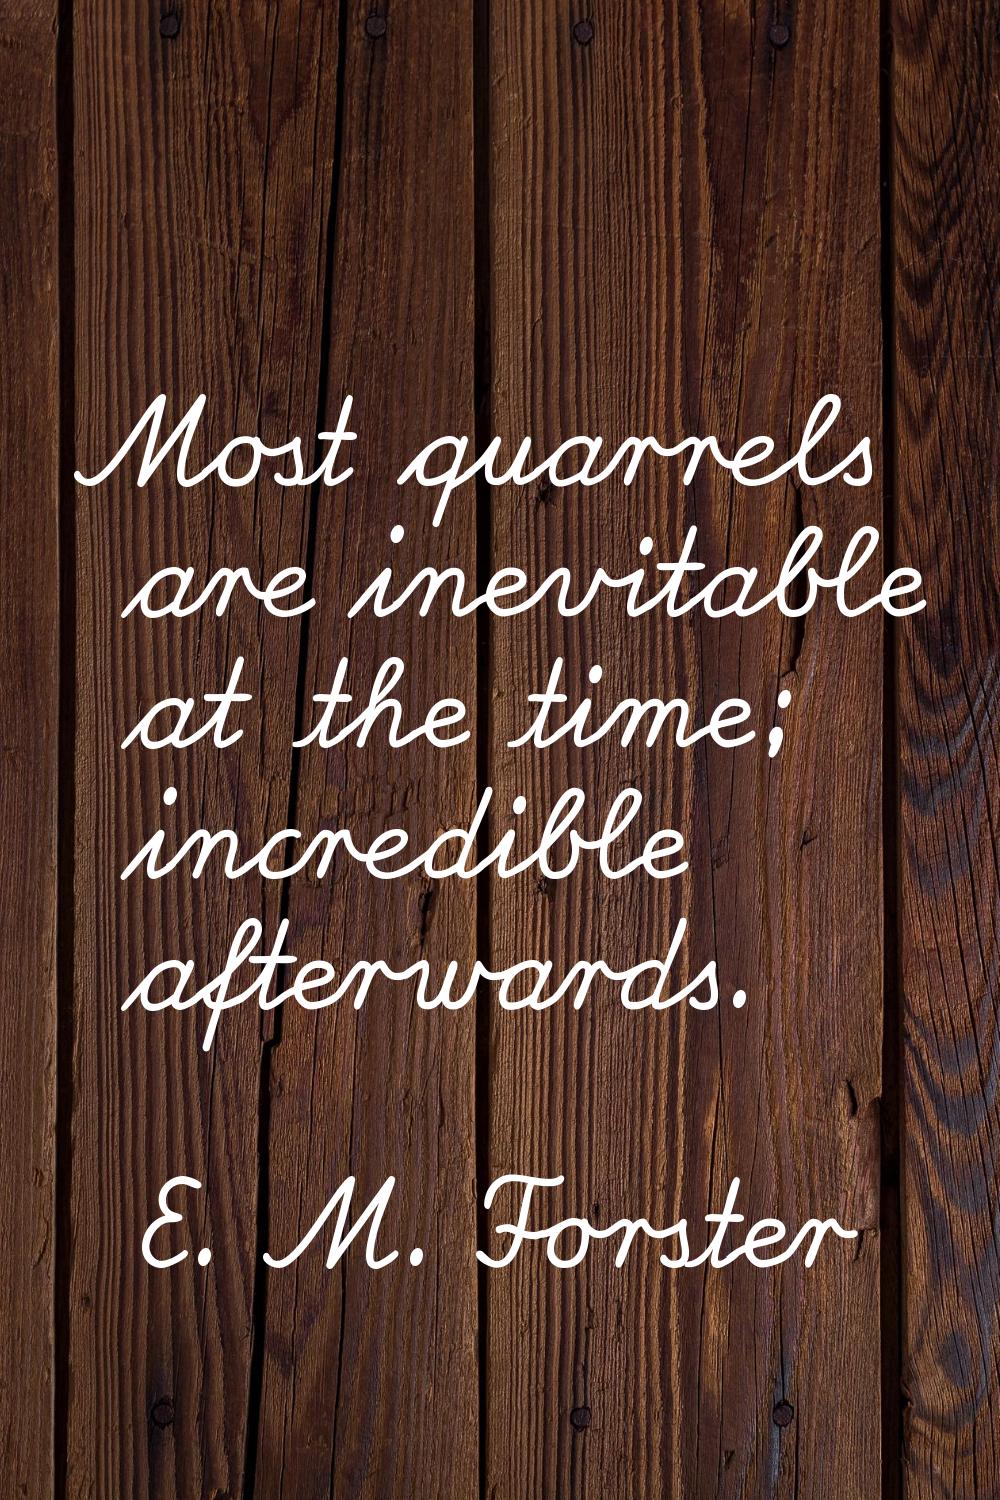 Most quarrels are inevitable at the time; incredible afterwards.